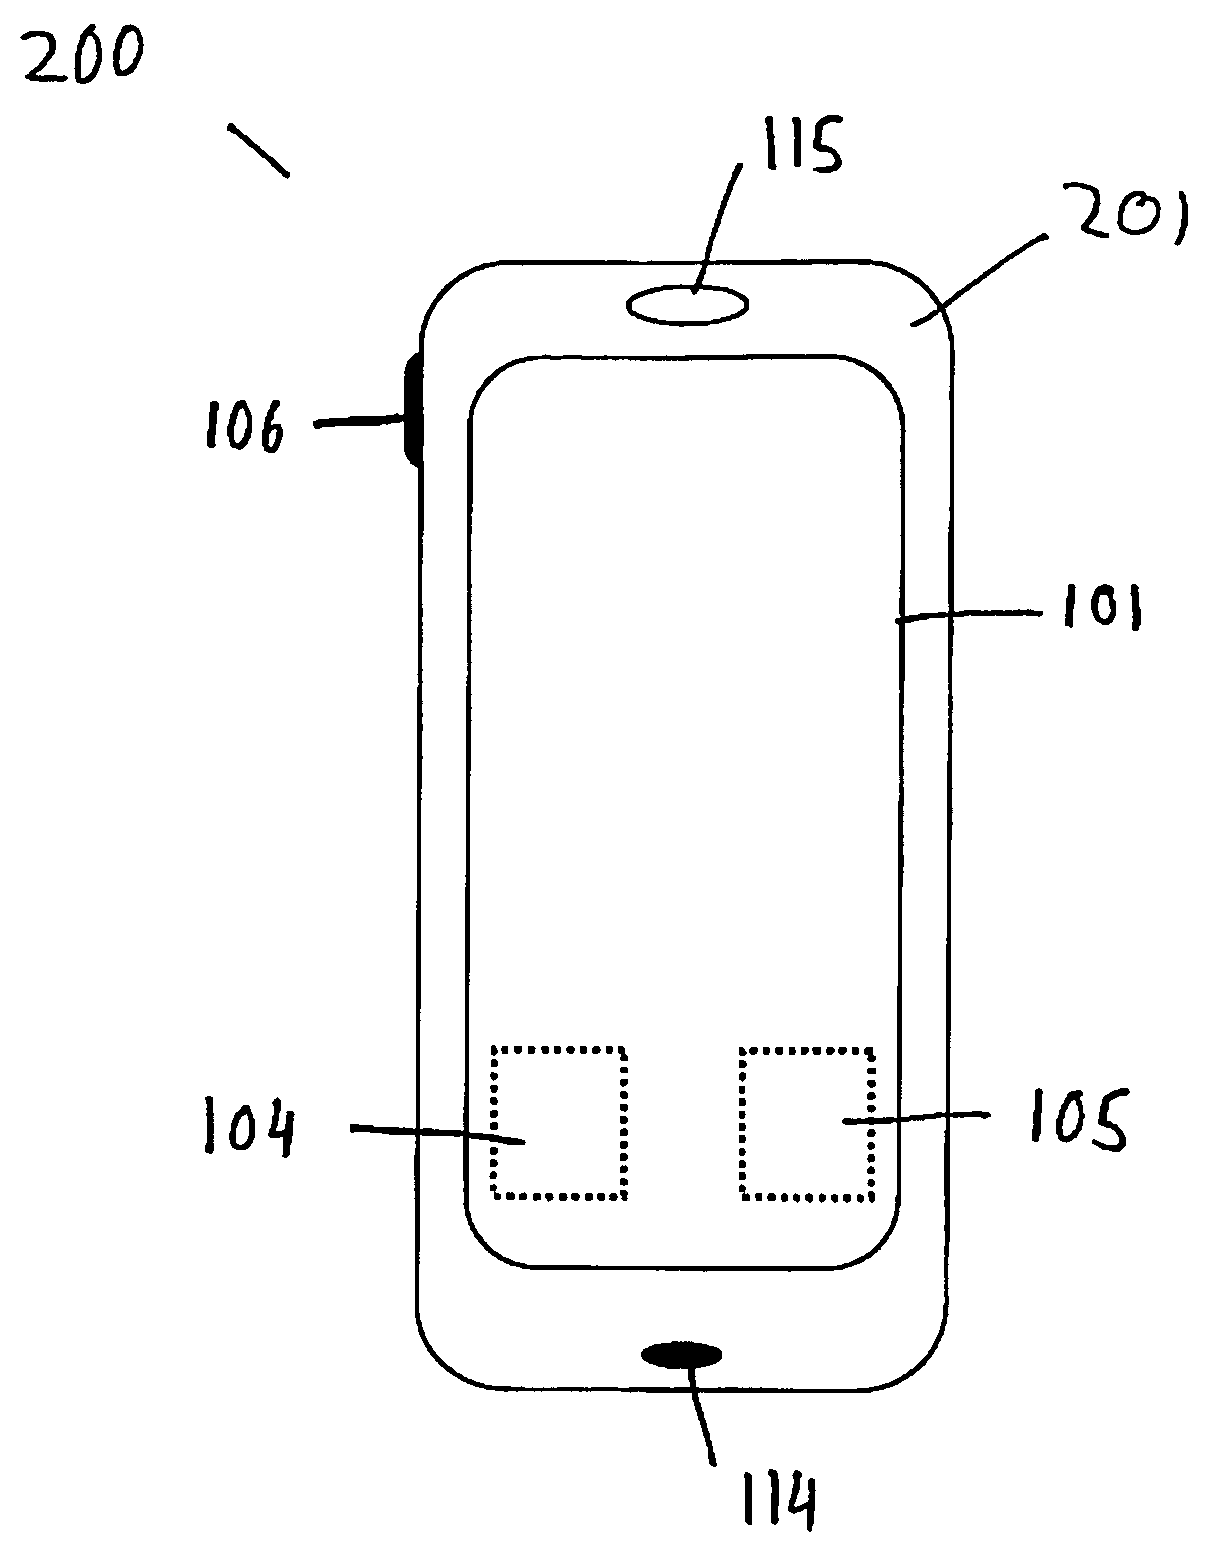 Method of unlocking a mobile electronic device